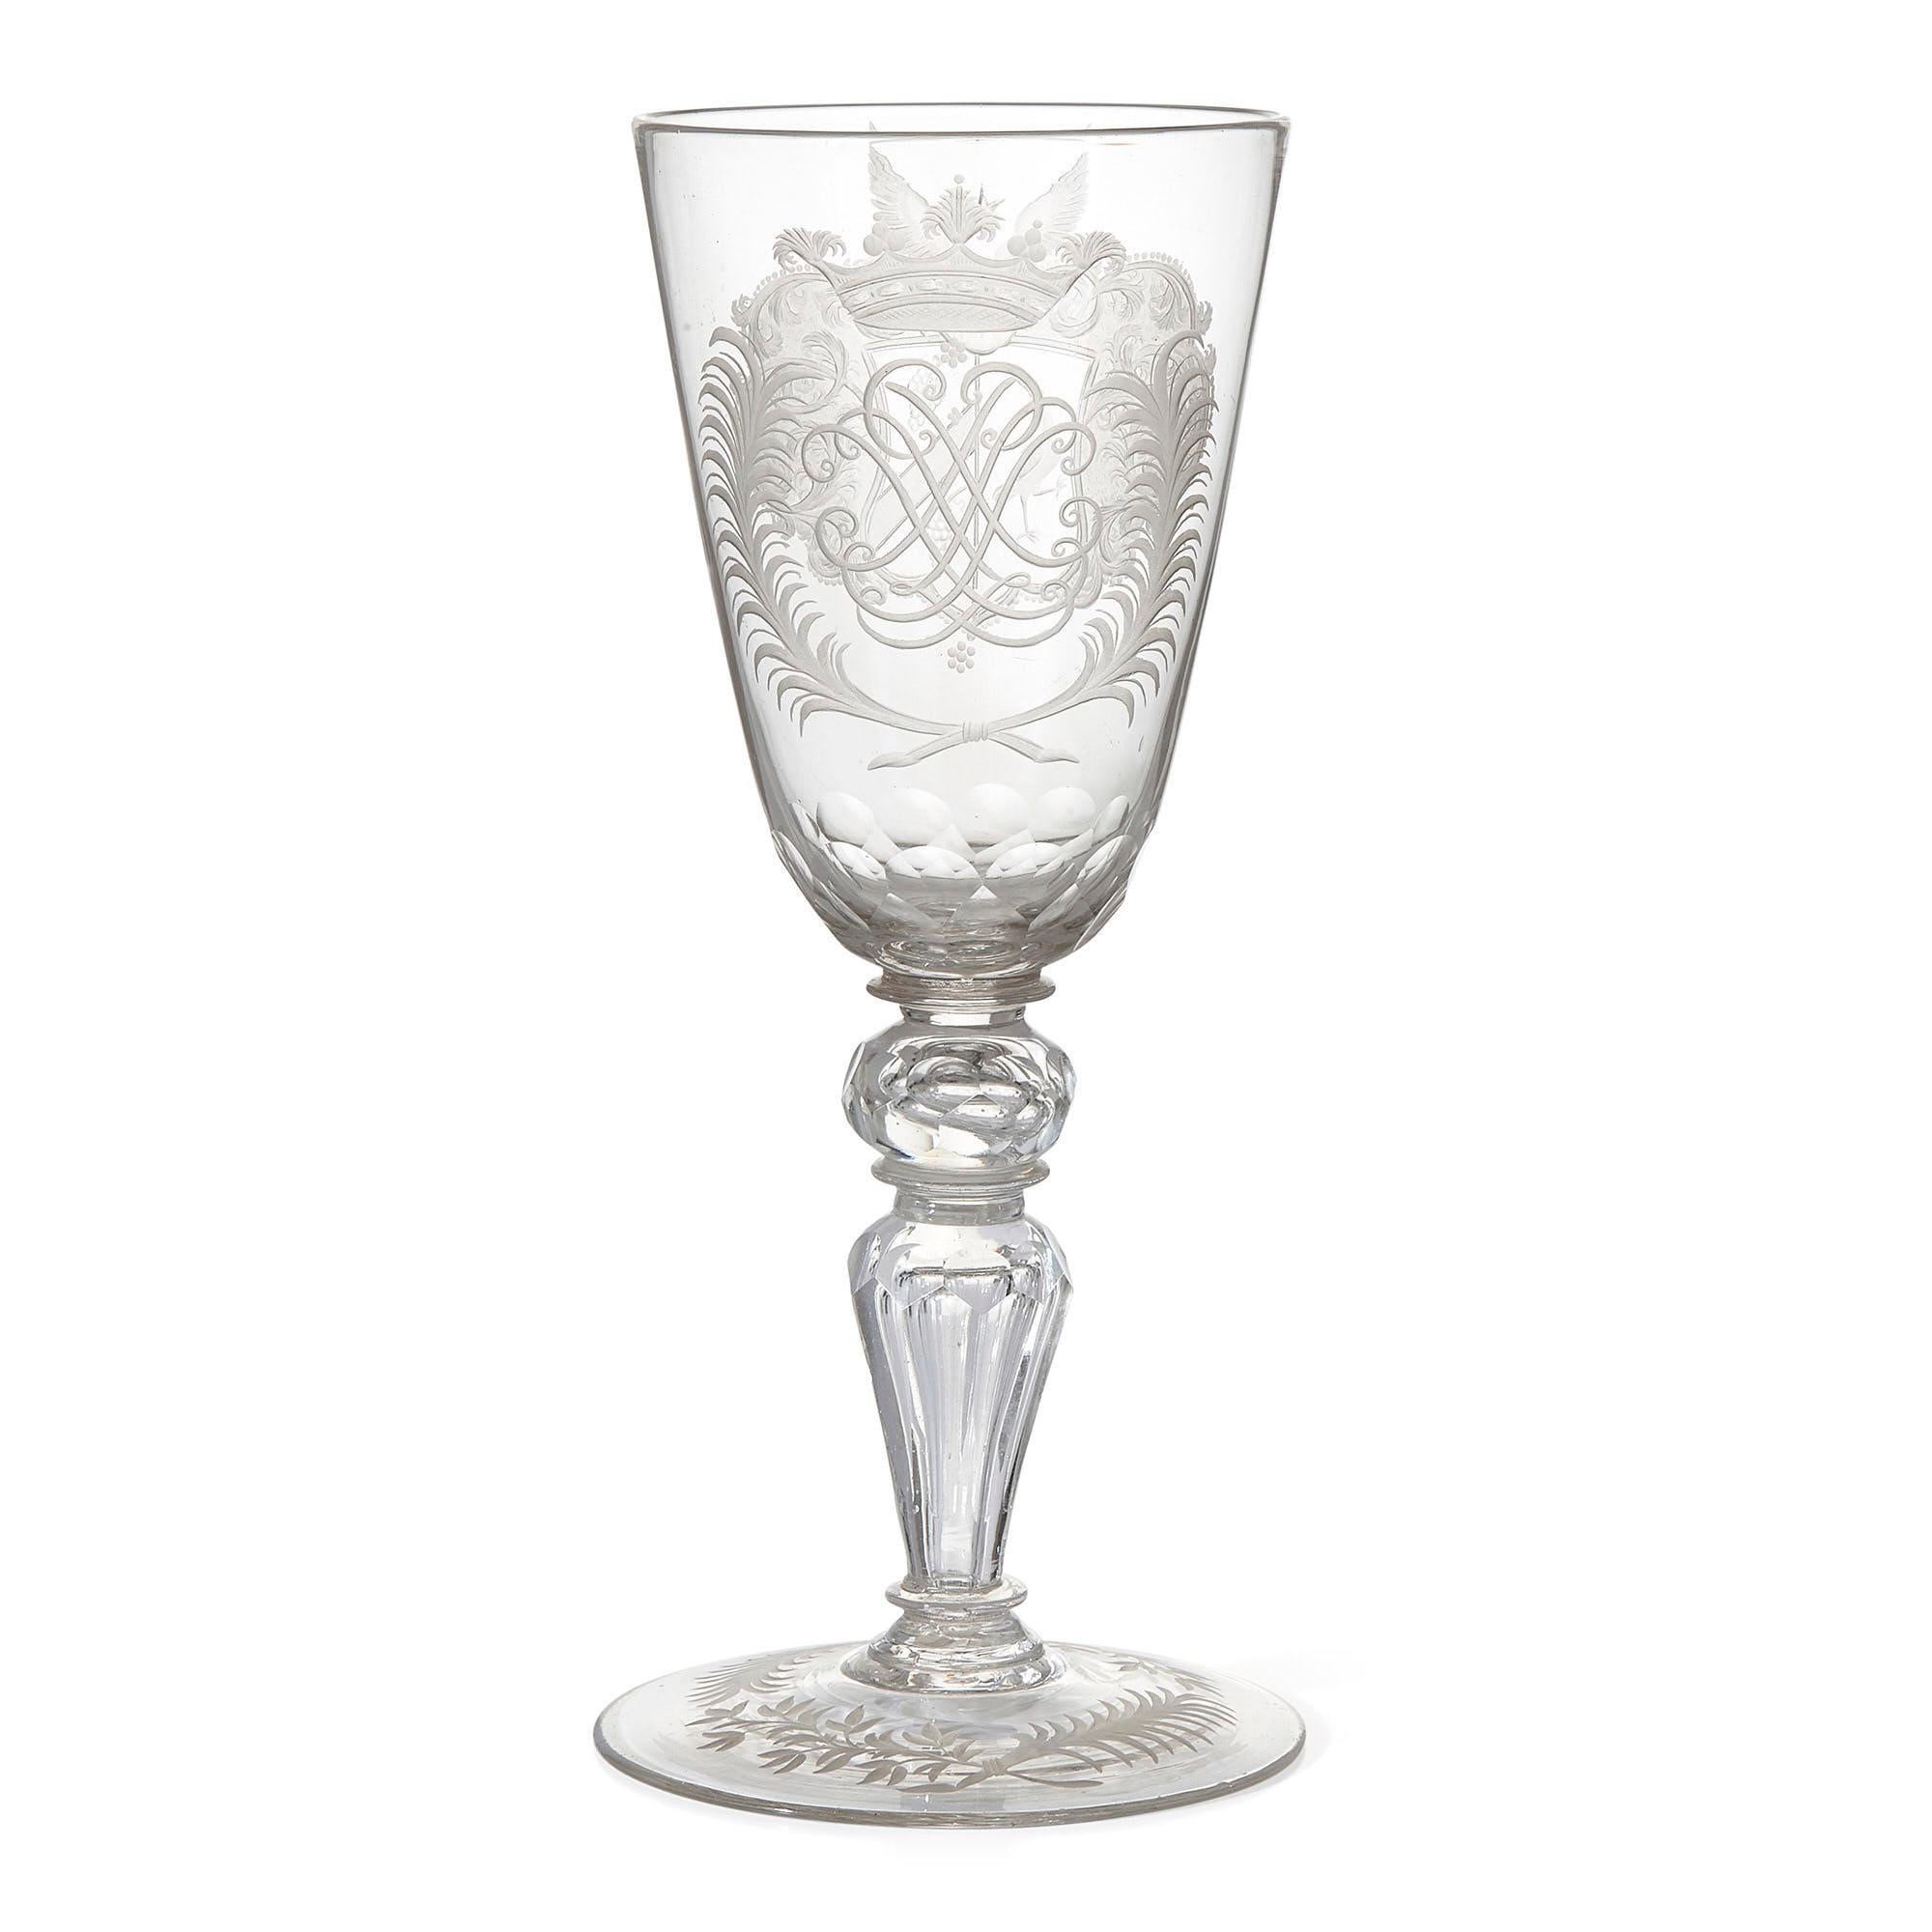 Antique 18th century glass goblet with engraving from Thuringia
German, c. 1740
Dimensions: Height 29cm, diameter 12.5cm

Produced in Germany in c. 1740, this antique glass goblet is a fine example of 18th century Thuringian glassmaking. The